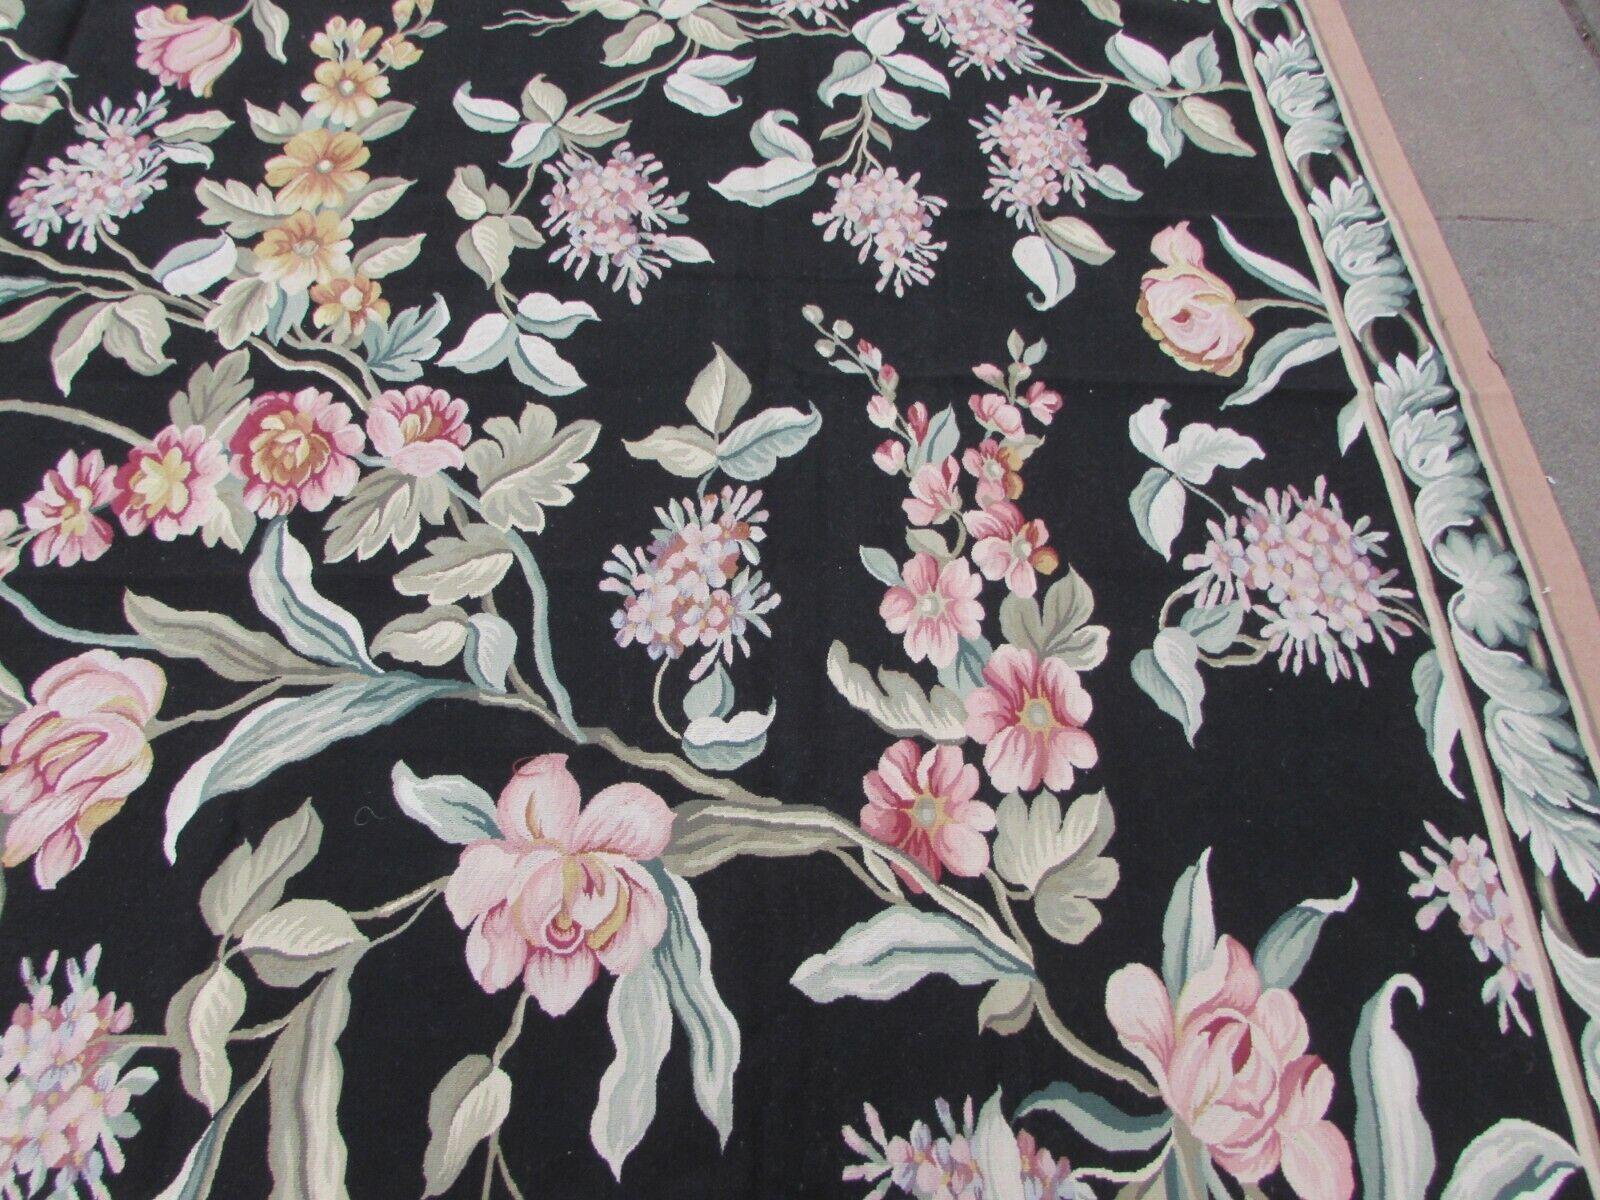 Handmade Vintage French Aubusson Rug 8.8' x 12.2', 1970s, 1Q51 For Sale 1